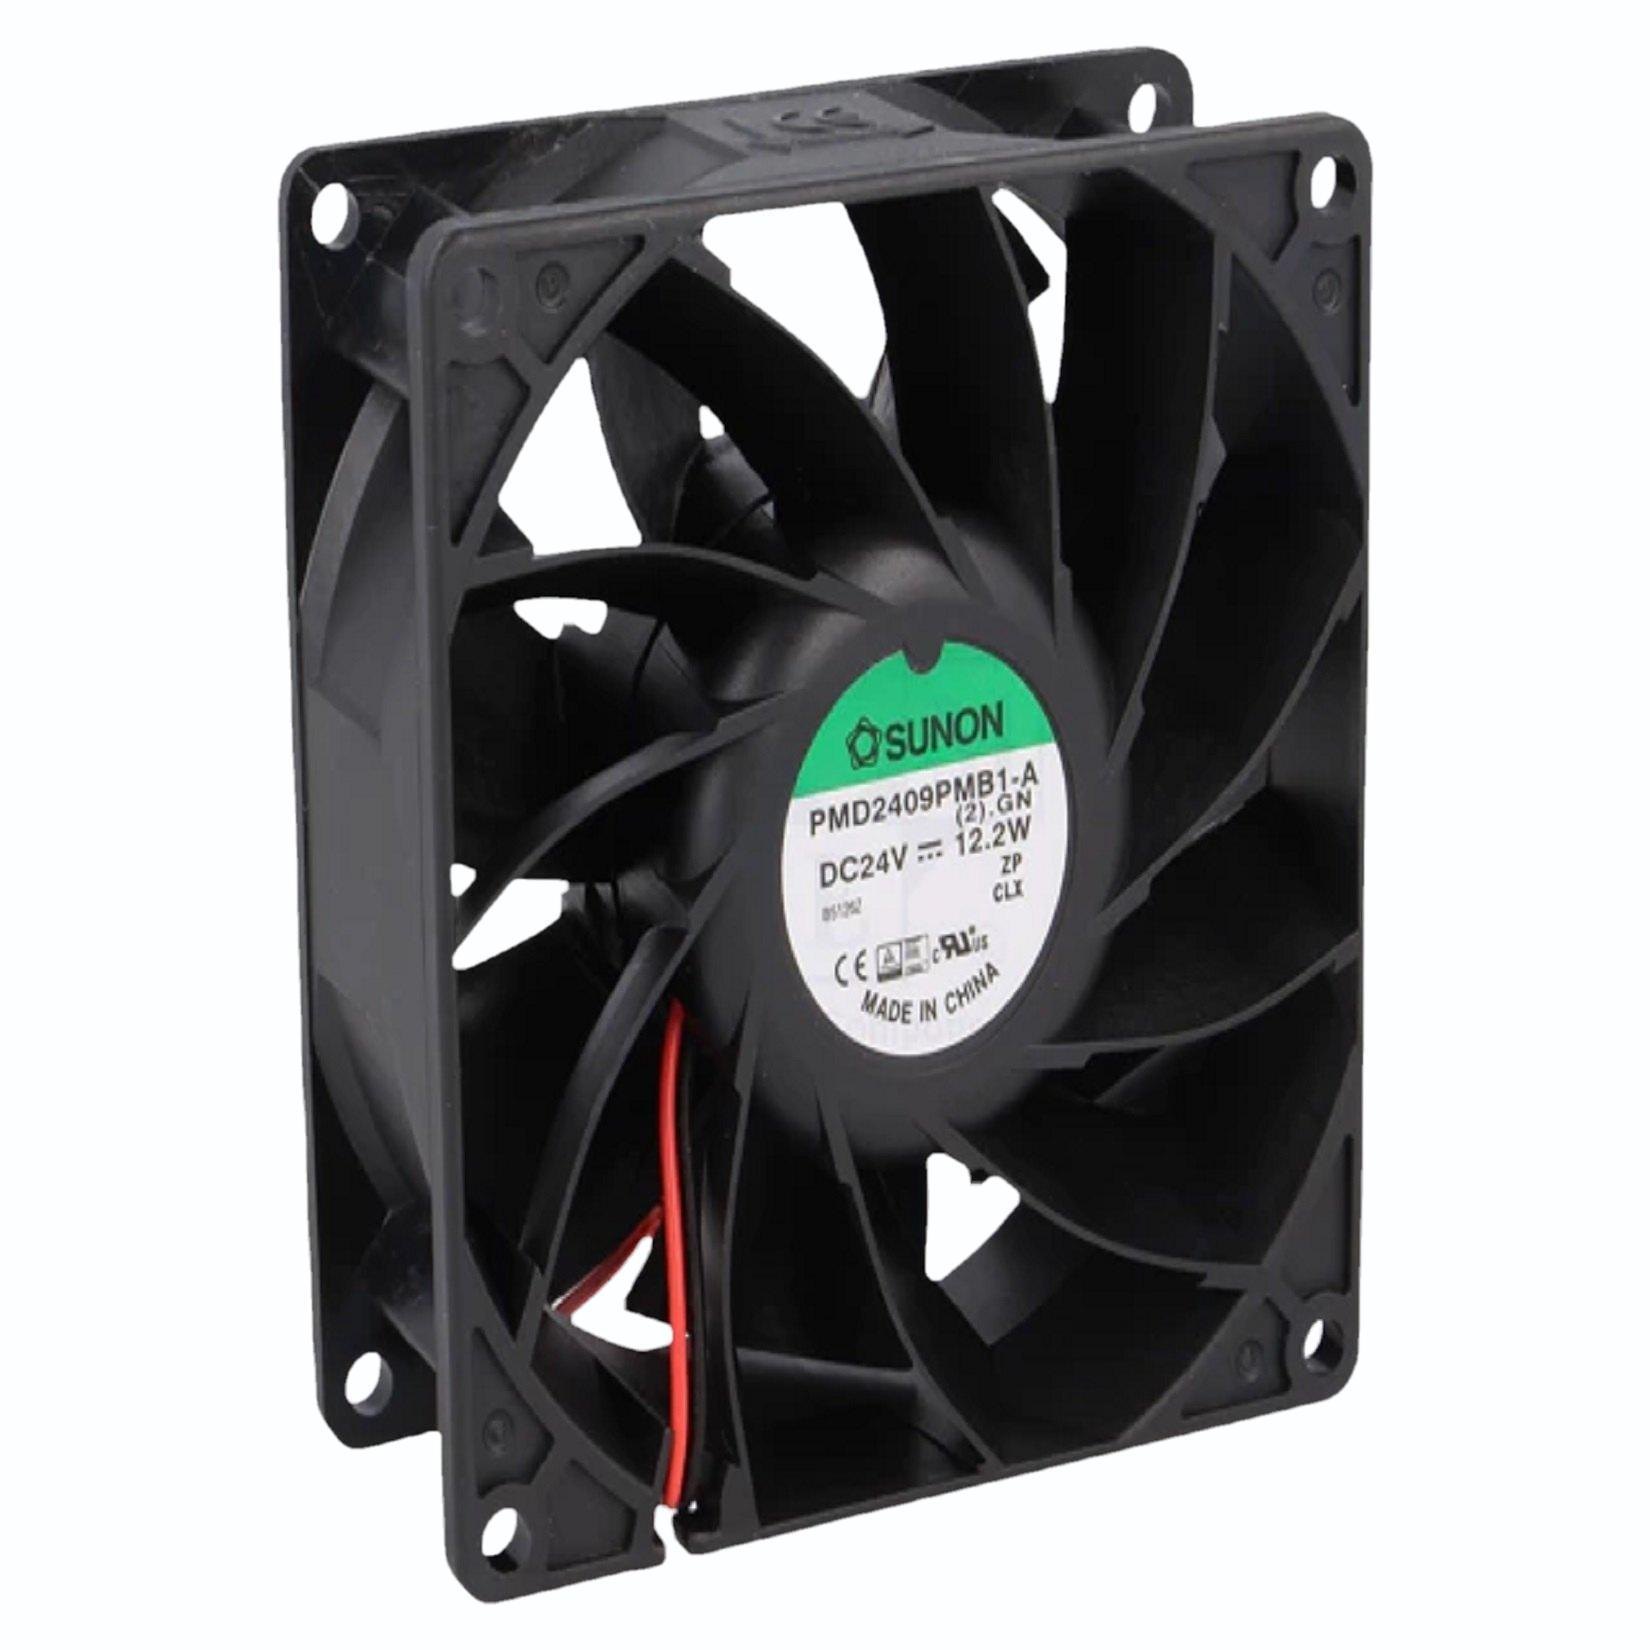 PMD2409PMB1-A Cooling Fan